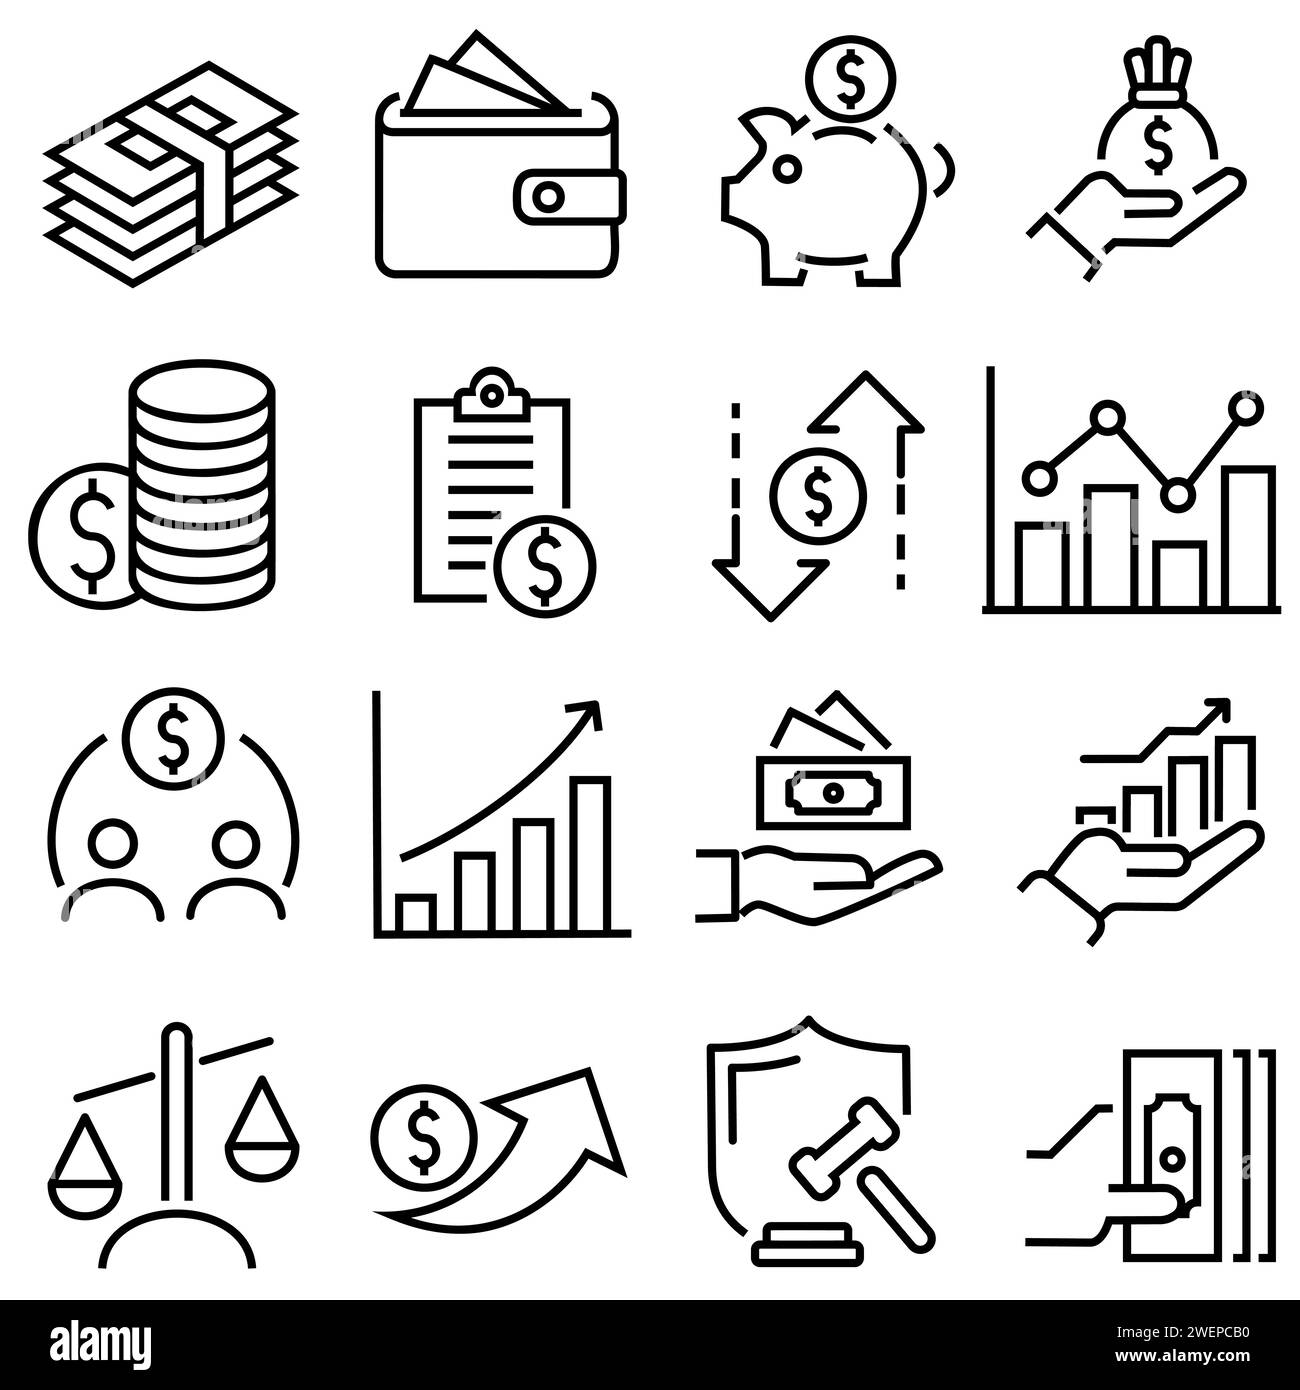 Finance and business icons collection. Big UI icon set in a flat design. Icons pack. Vector illustration EPS10 Stock Vector